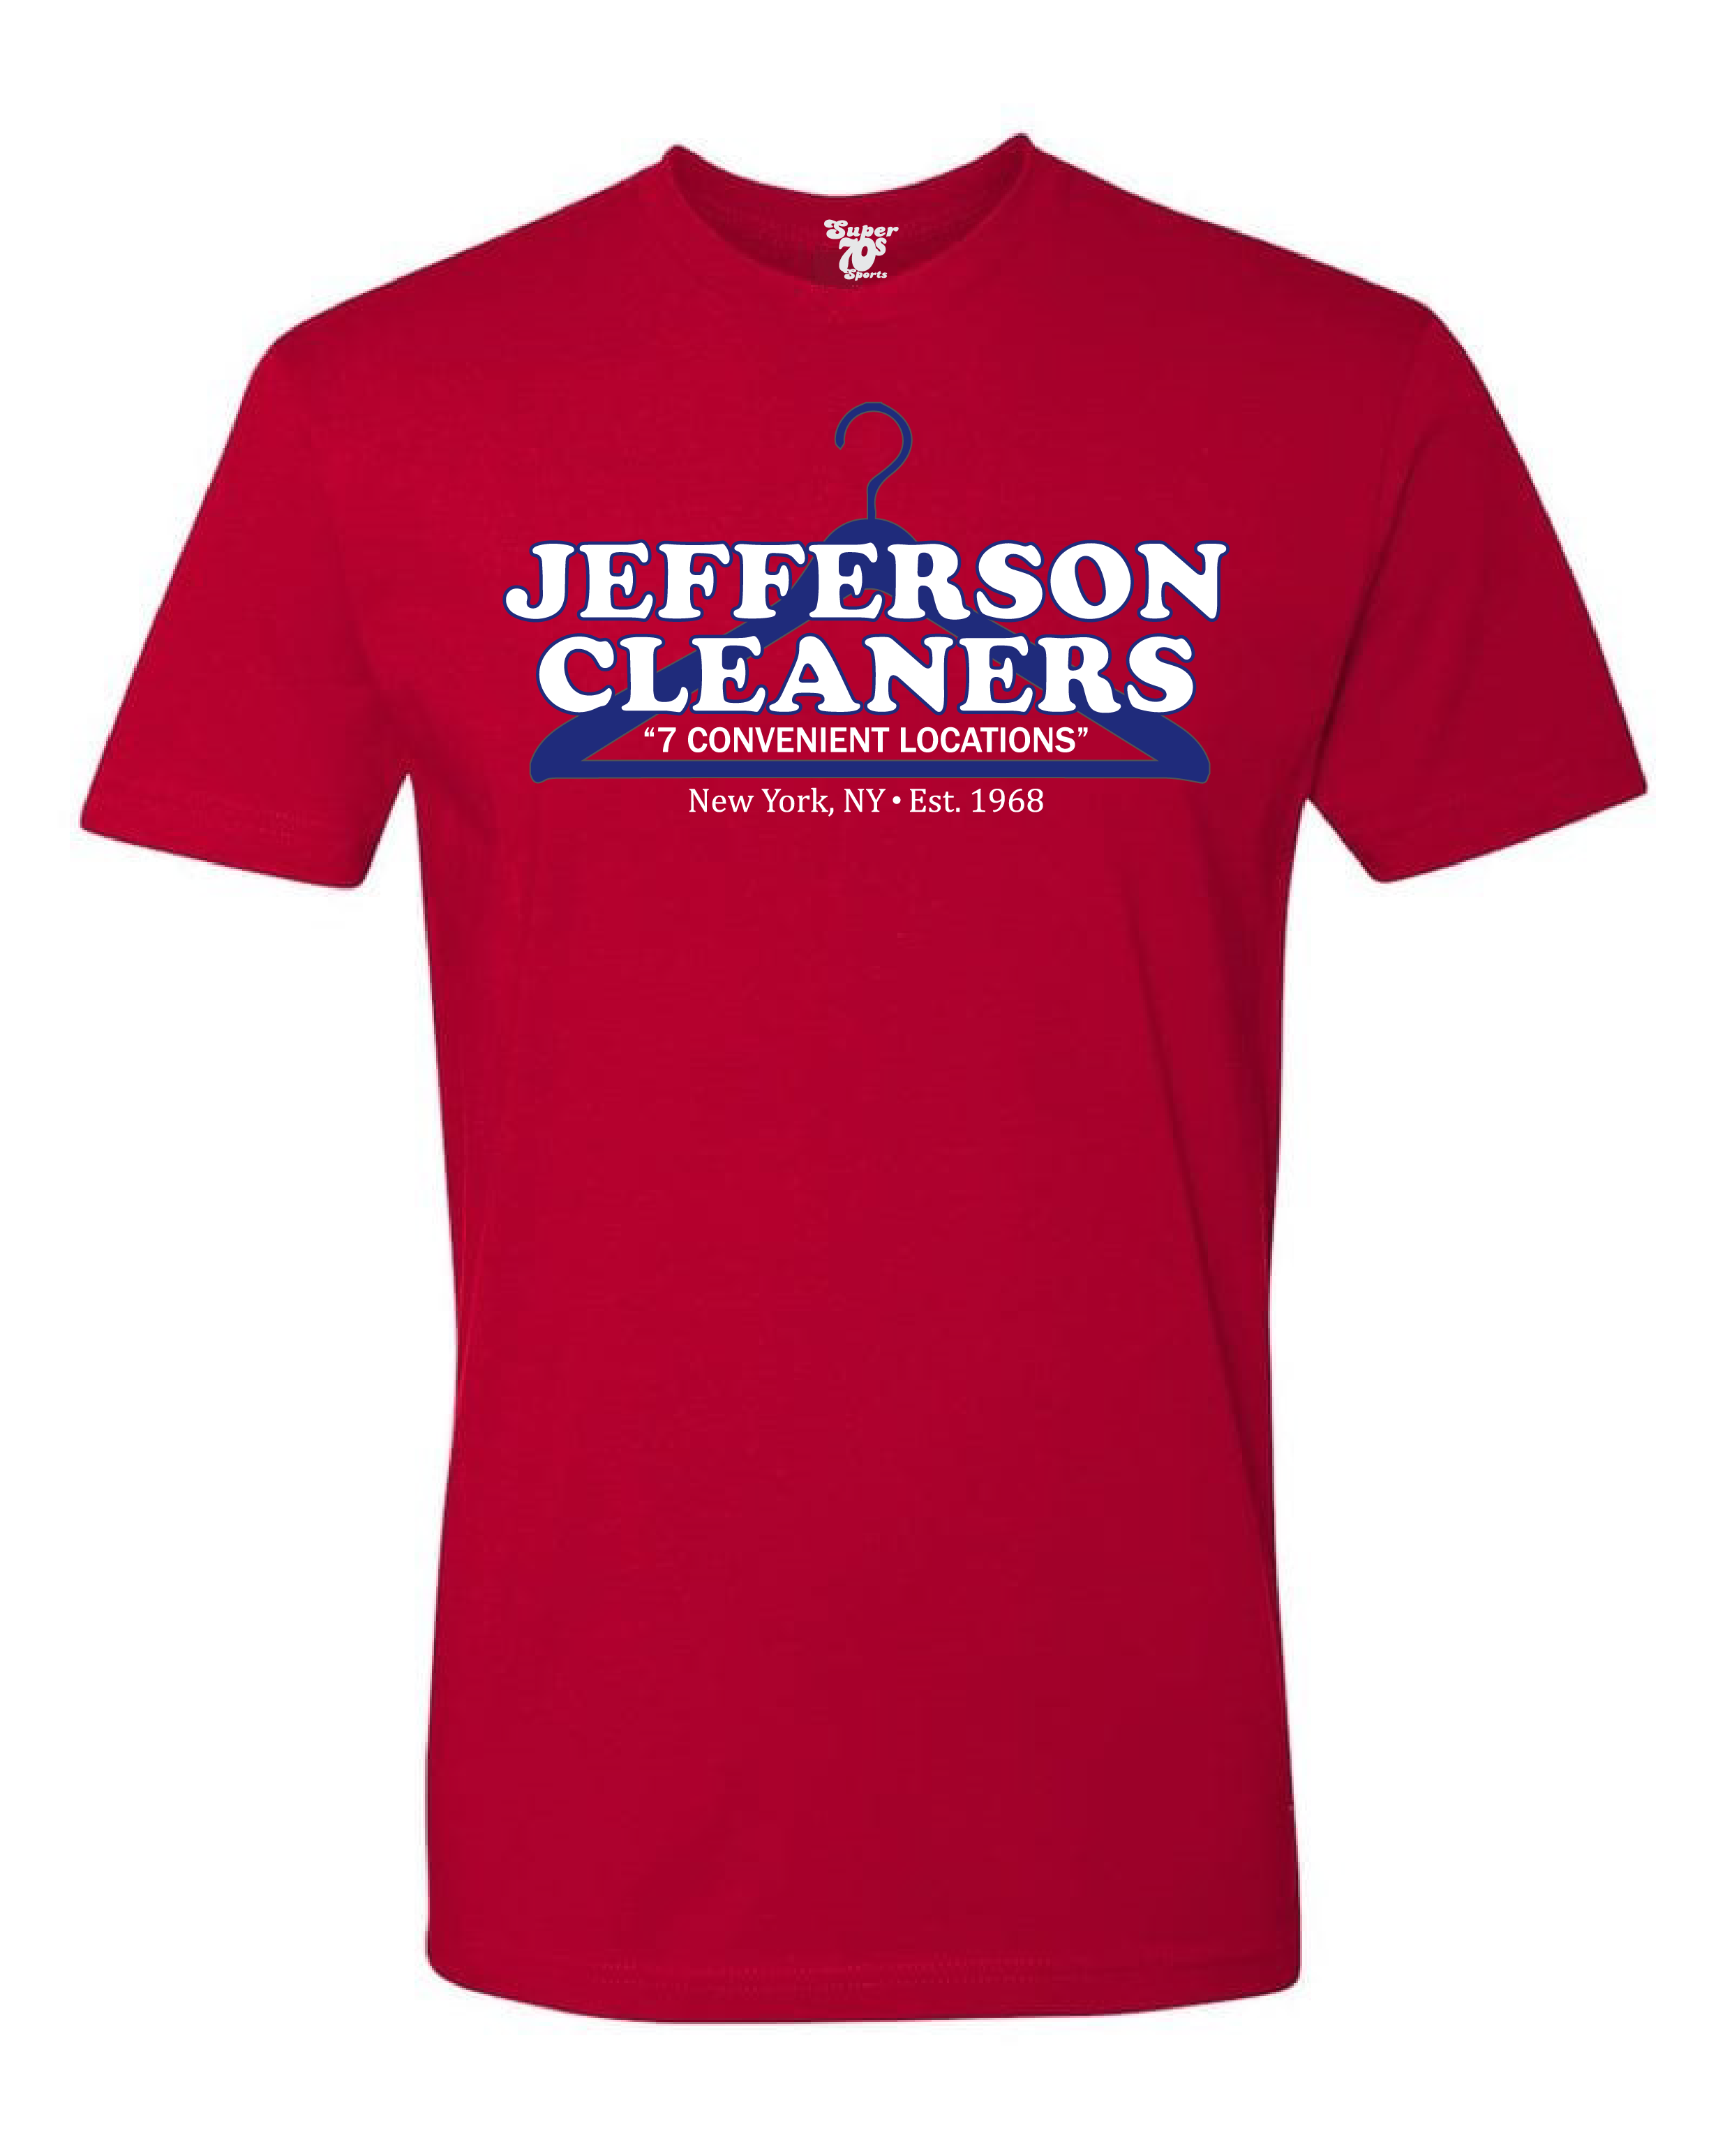 0111-0050-10_-_Jefferson_Cleaners_Tee_-_RED_2472x.png